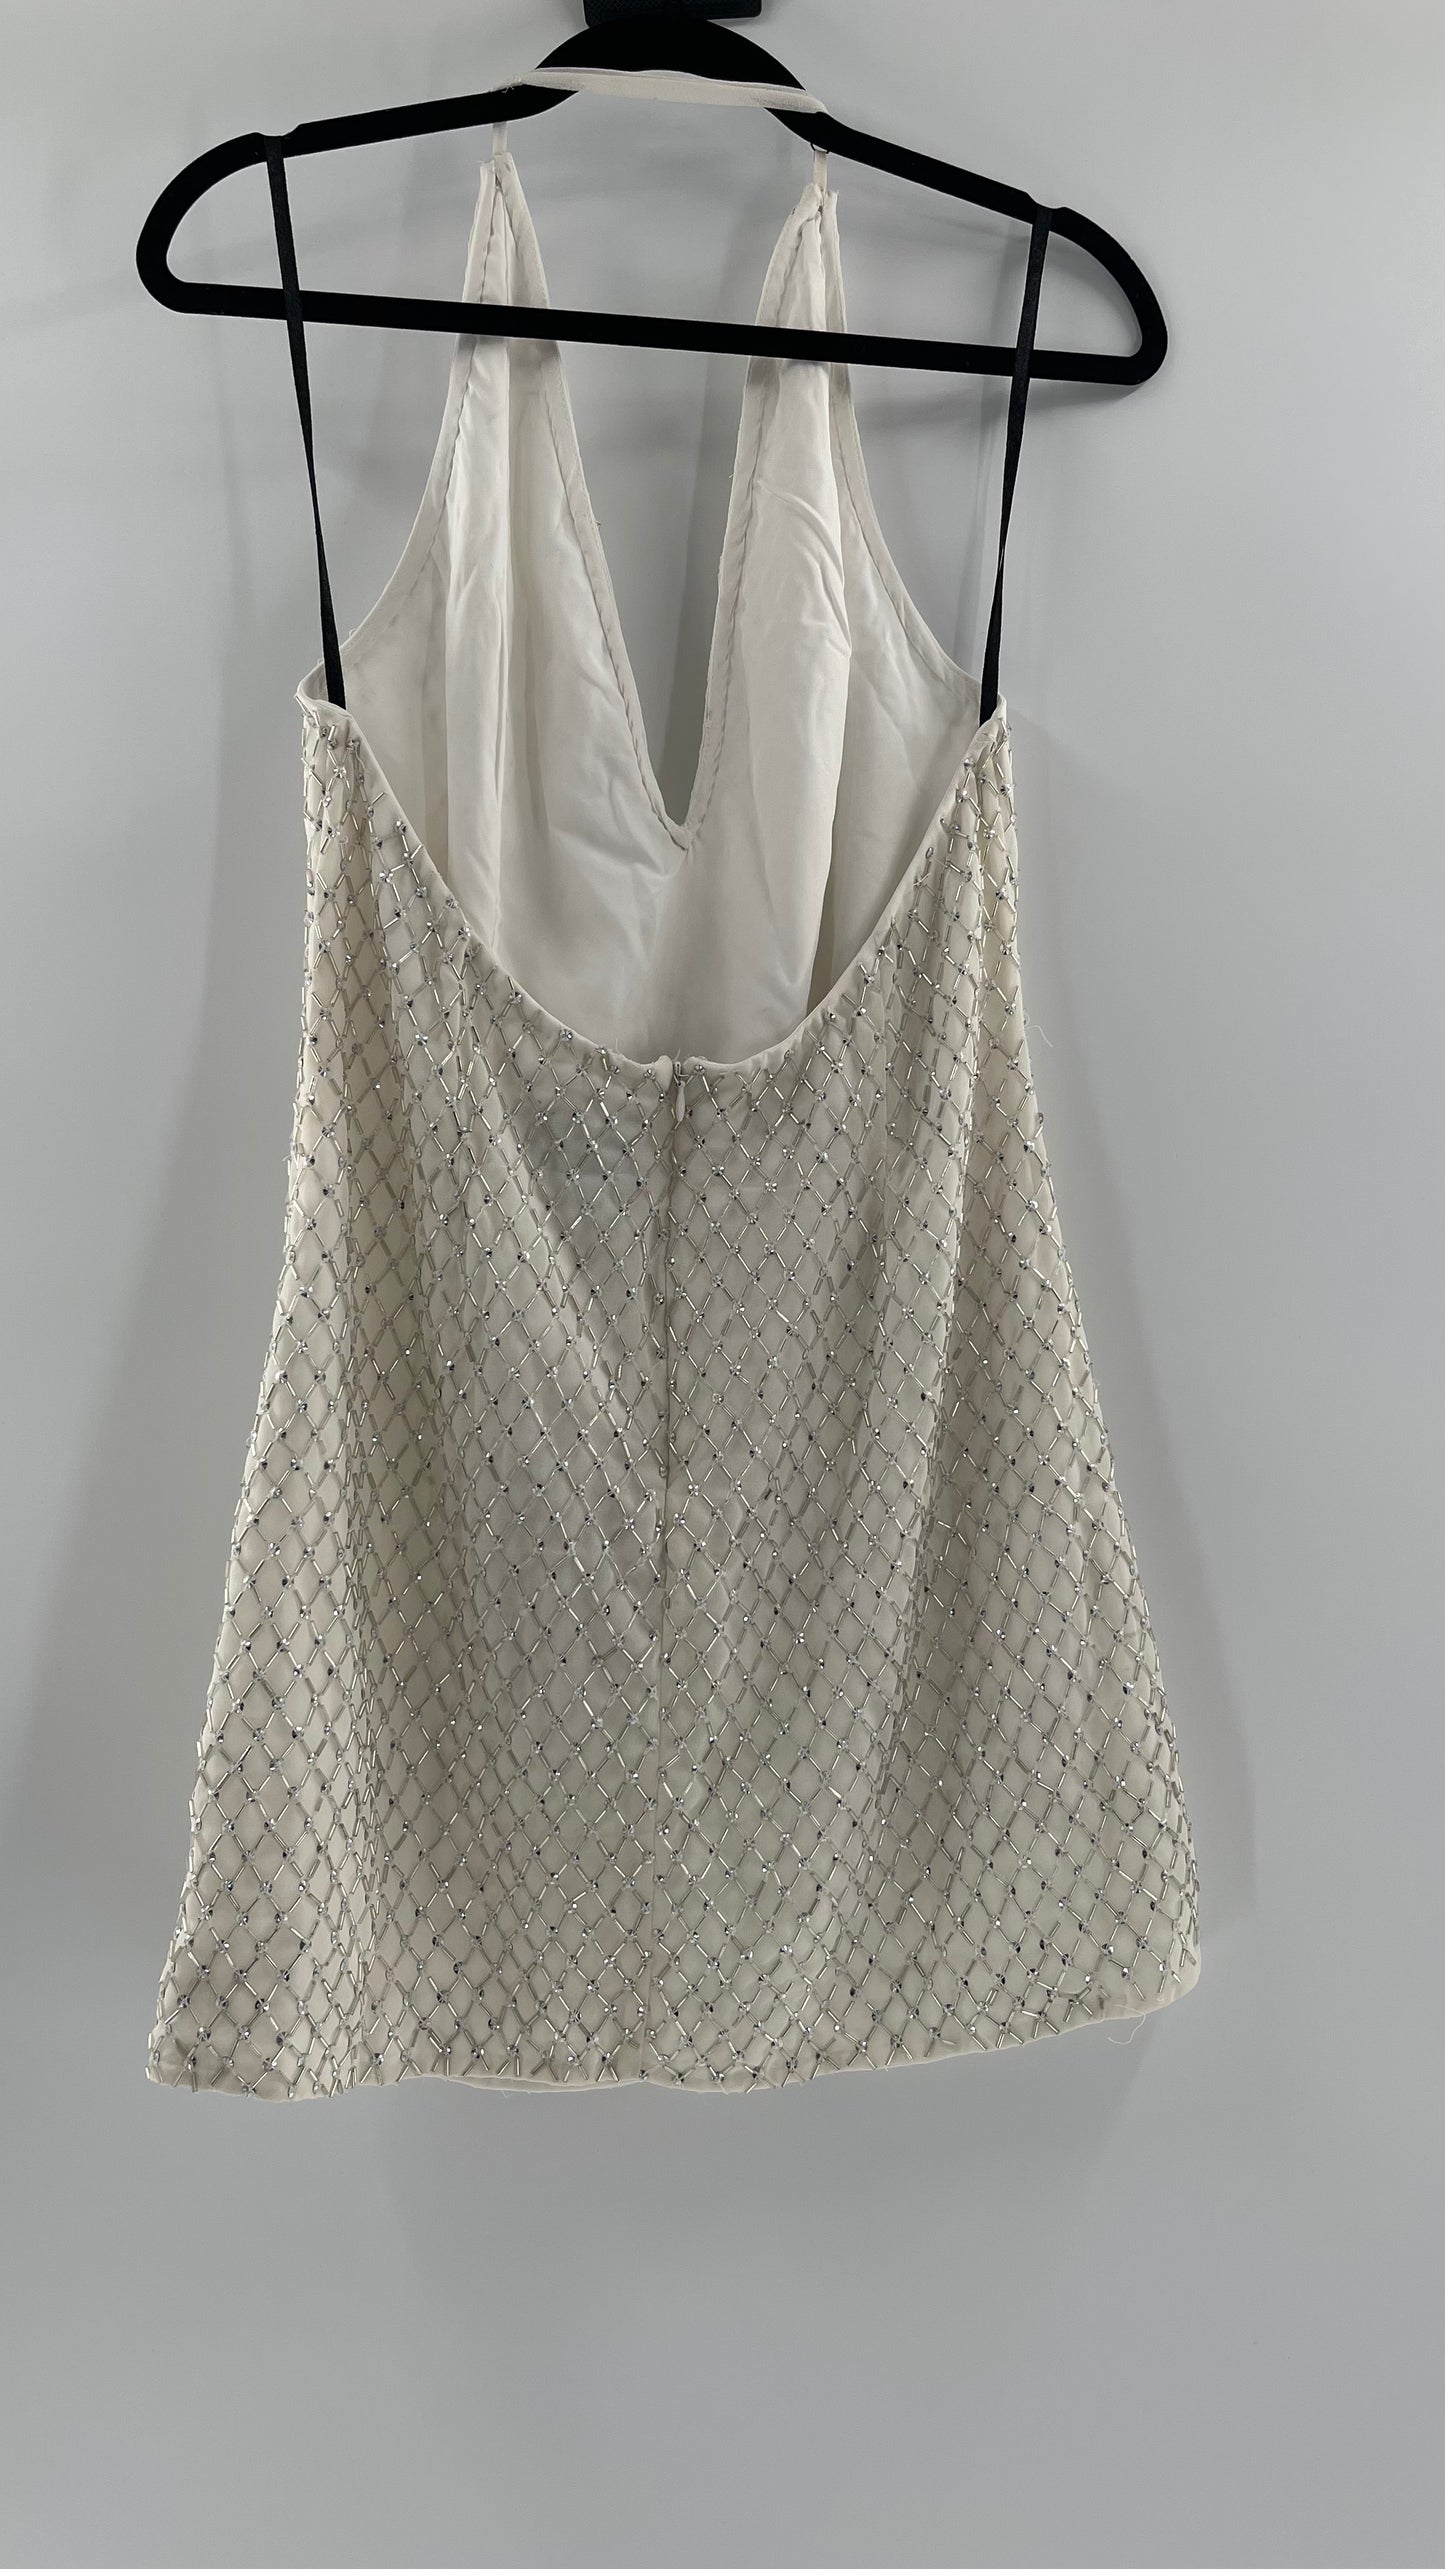 X by NBD White Jack Dress in Ivory Silver Beaded Halter Dress with Tags Attached (Large)